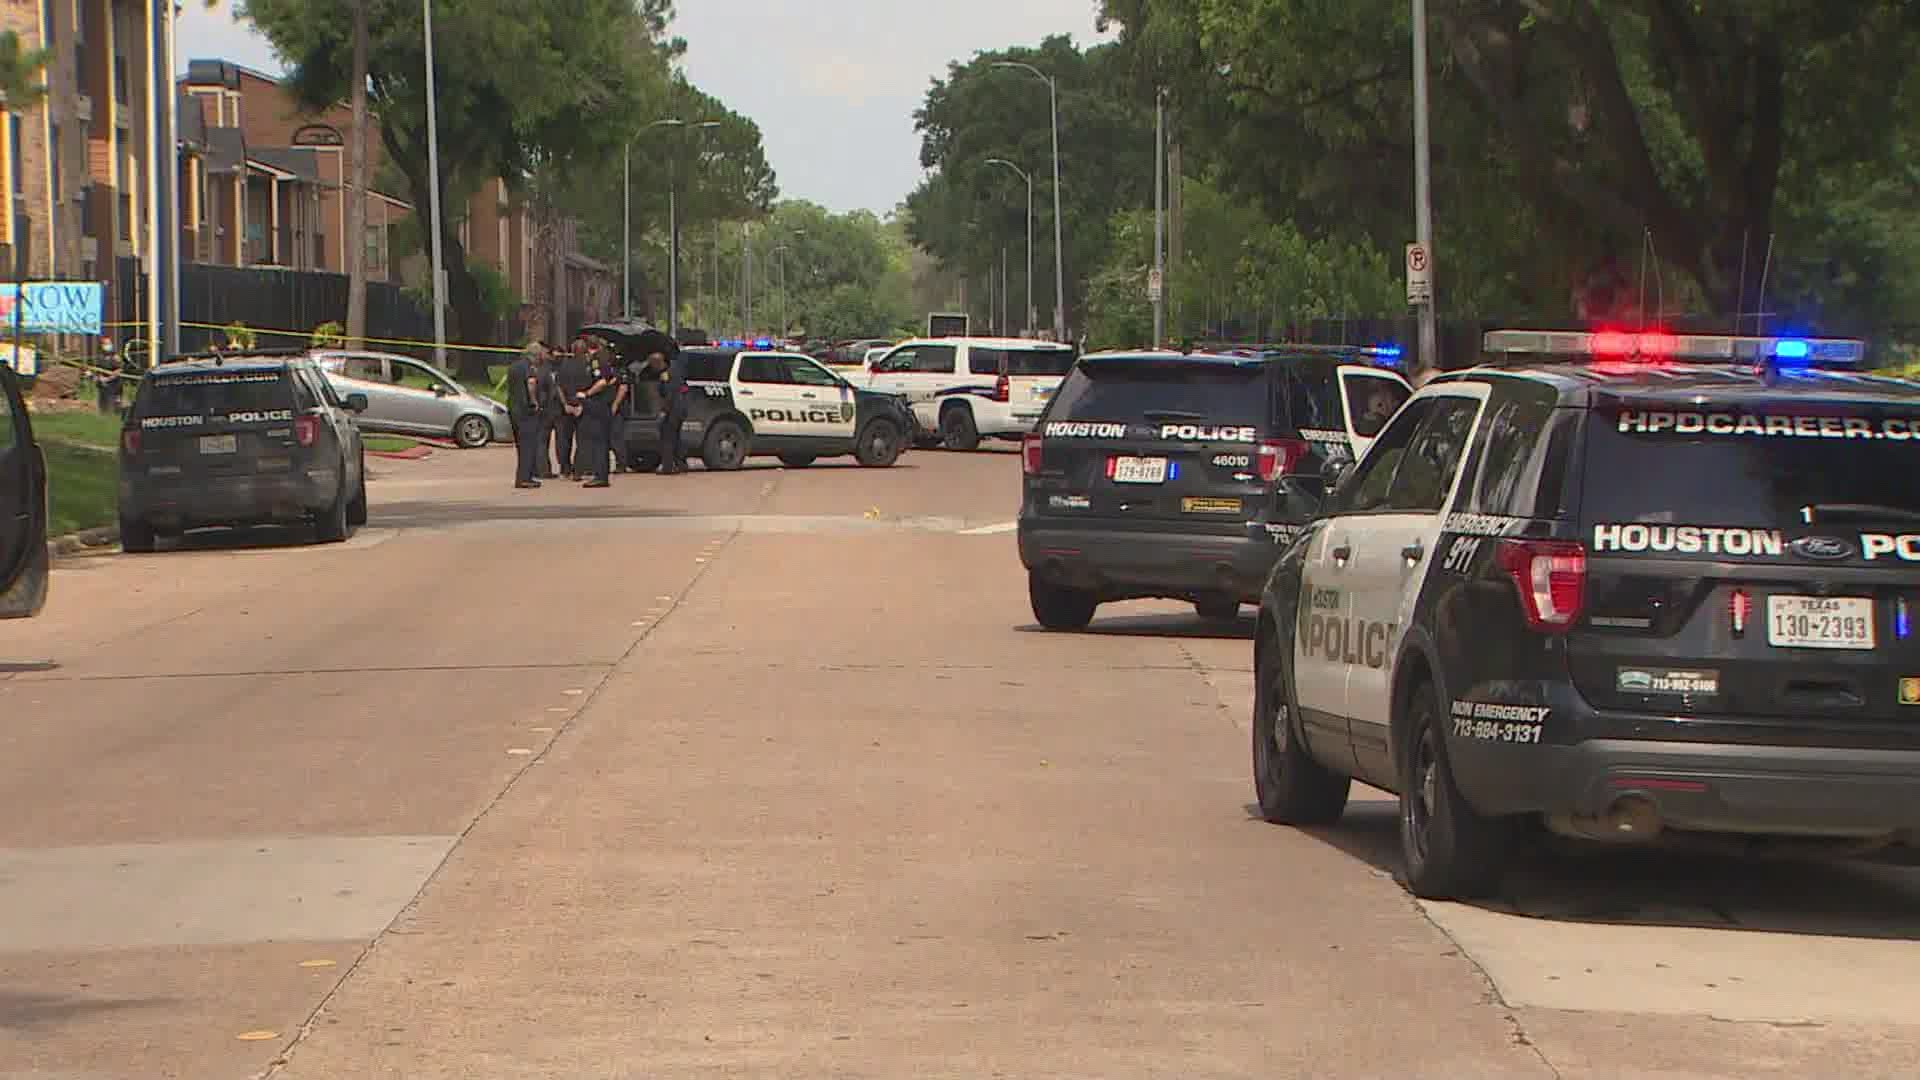 Houston police said a possible suspect was detained after the shooting in the 5600 block of De Soto.